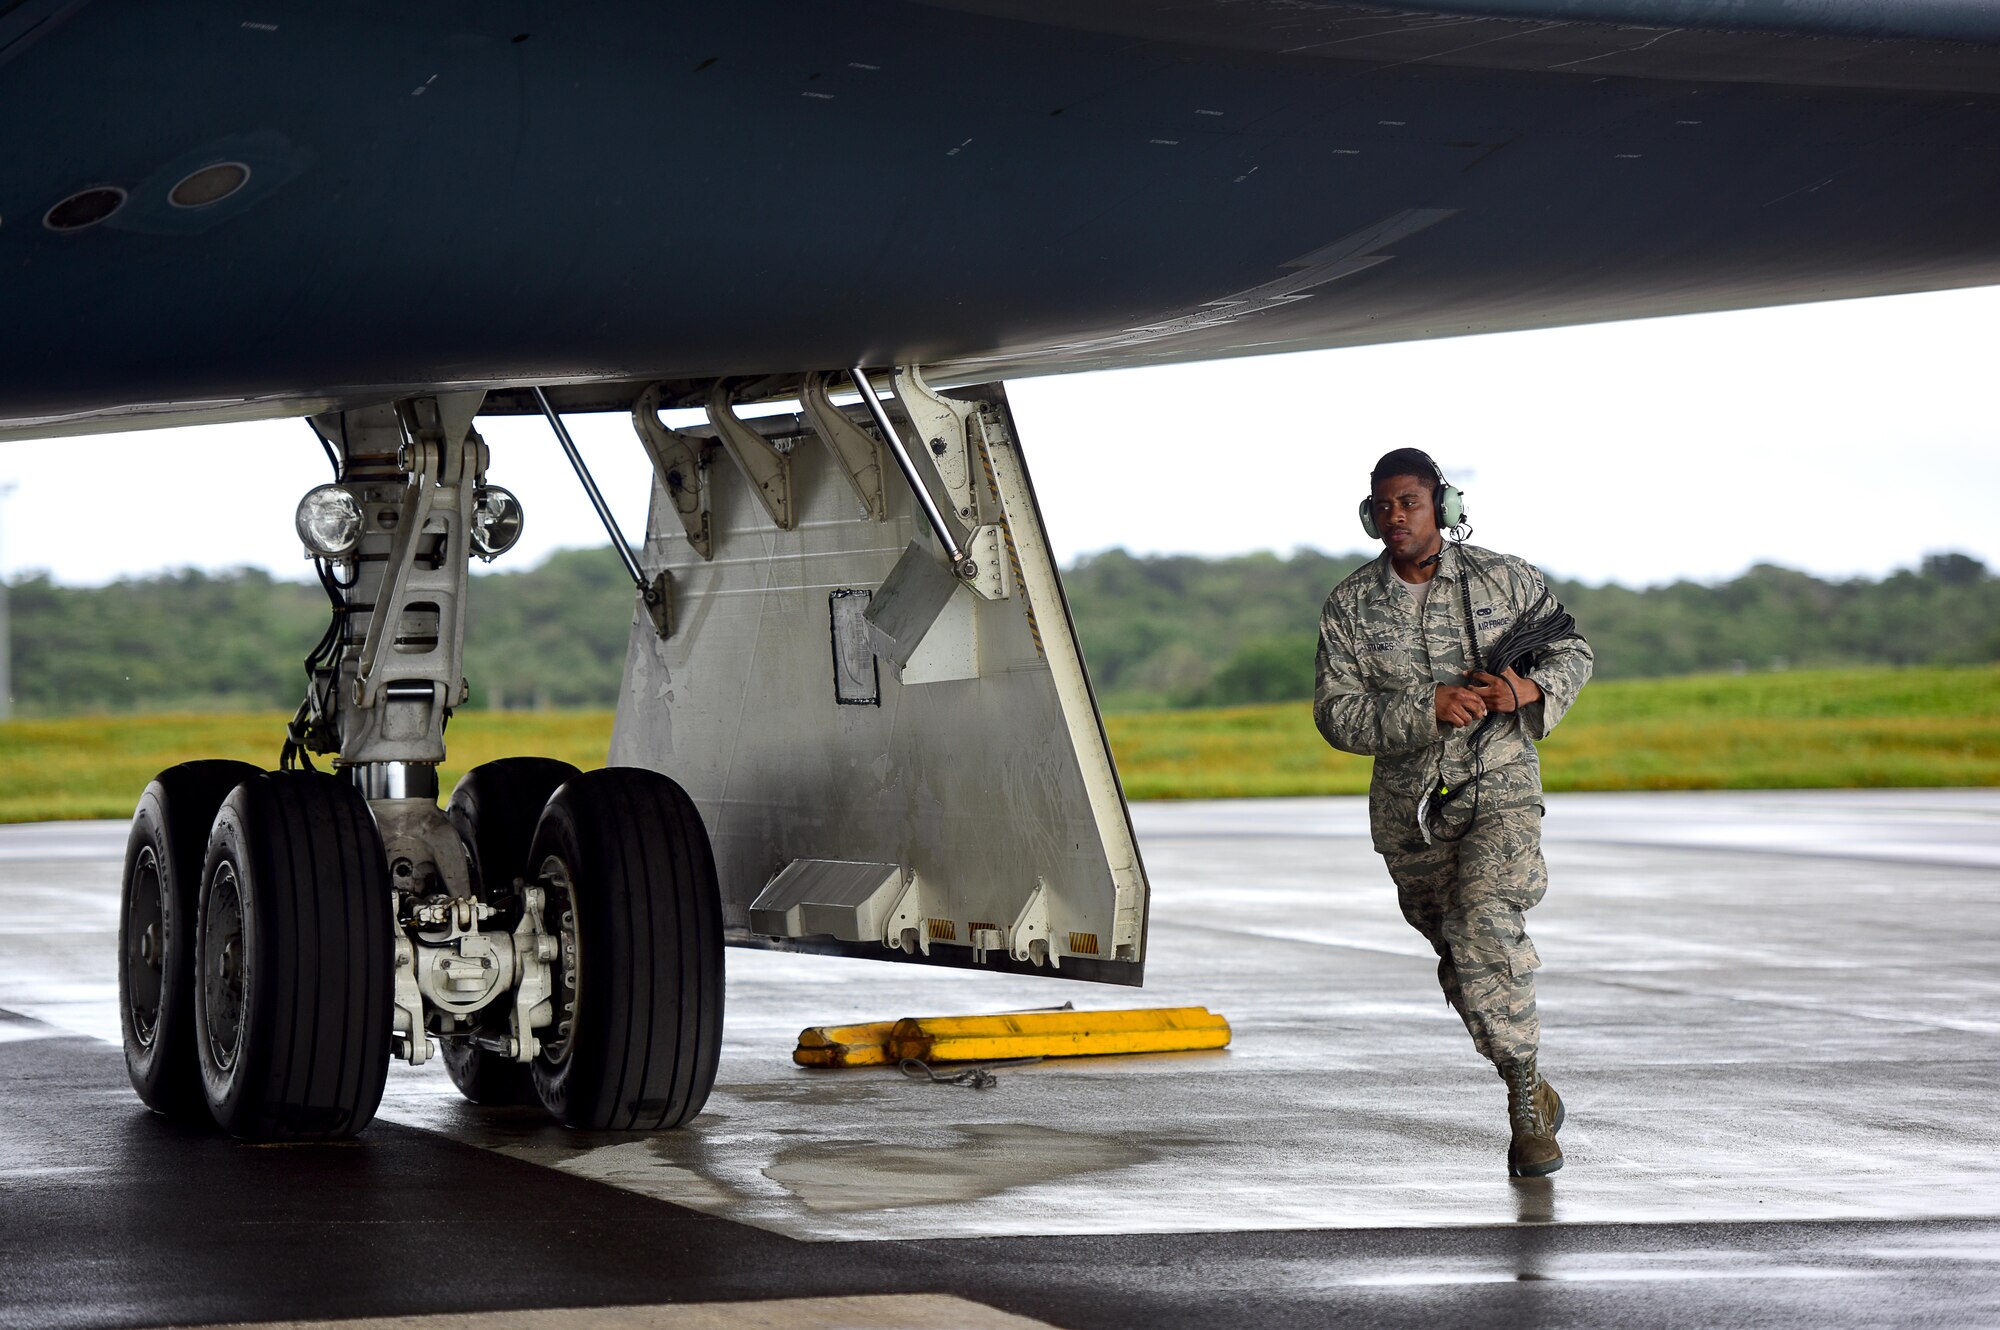 U.S. Air Force Senior Airman Dez Starkes, a crew chief assigned to the 509th Aircraft Maintenance Squadron, runs to the other side of a B-2 Spirit to remove chocks from the wheels prior to takeoff at Andersen Air Force Base, Guam, Jan. 12, 2017. Strategic bomber missions enhance the readiness and training necessary to respond to any potential crisis or challenge across the globe. (U.S. Air Force photo by Airman 1st Class Jazmin Smith)